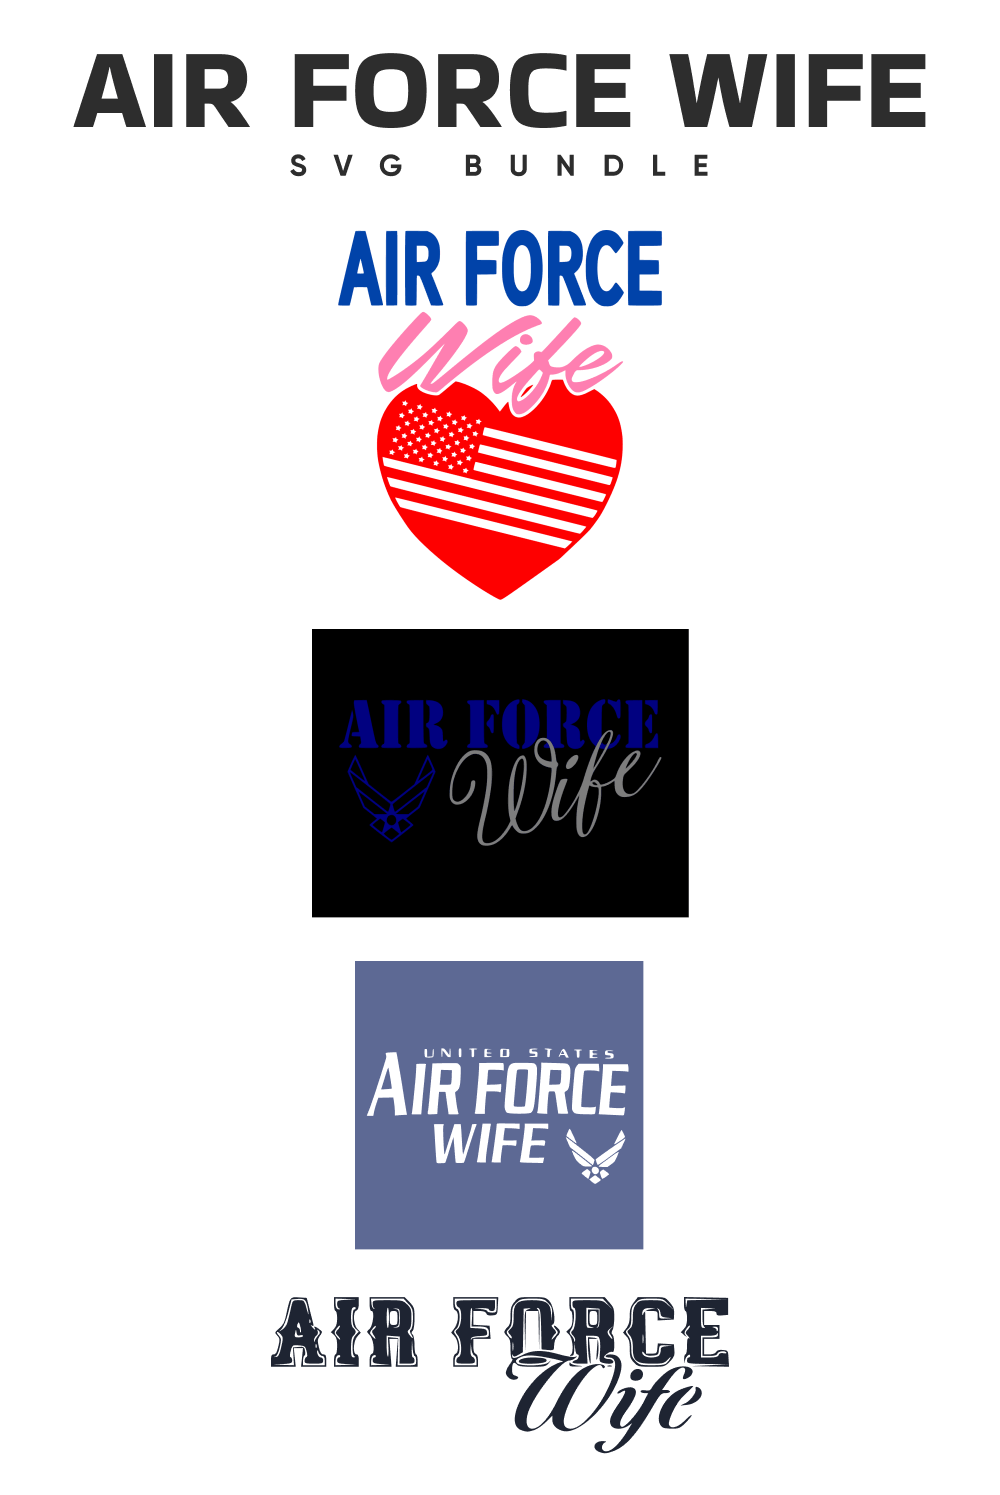 Logos with inscription "United States Air Force Wife" on the different backgrounds.